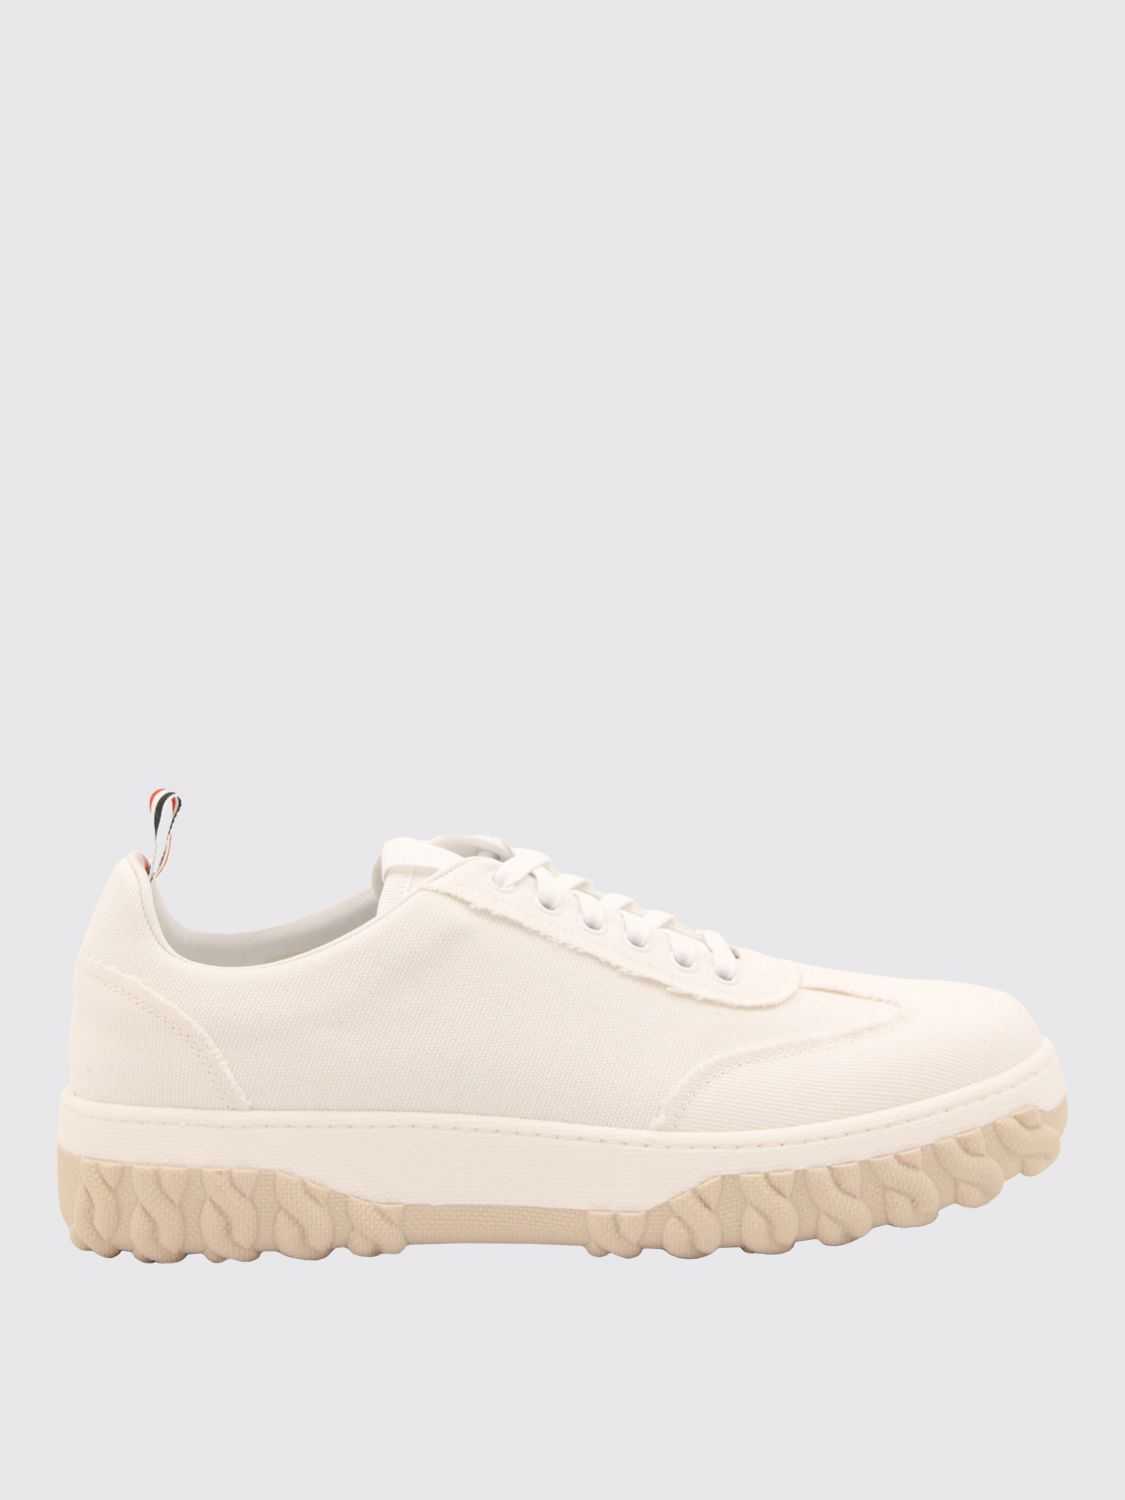 Thom Browne Outlet: sneakers for man - White | Thom Browne sneakers ...